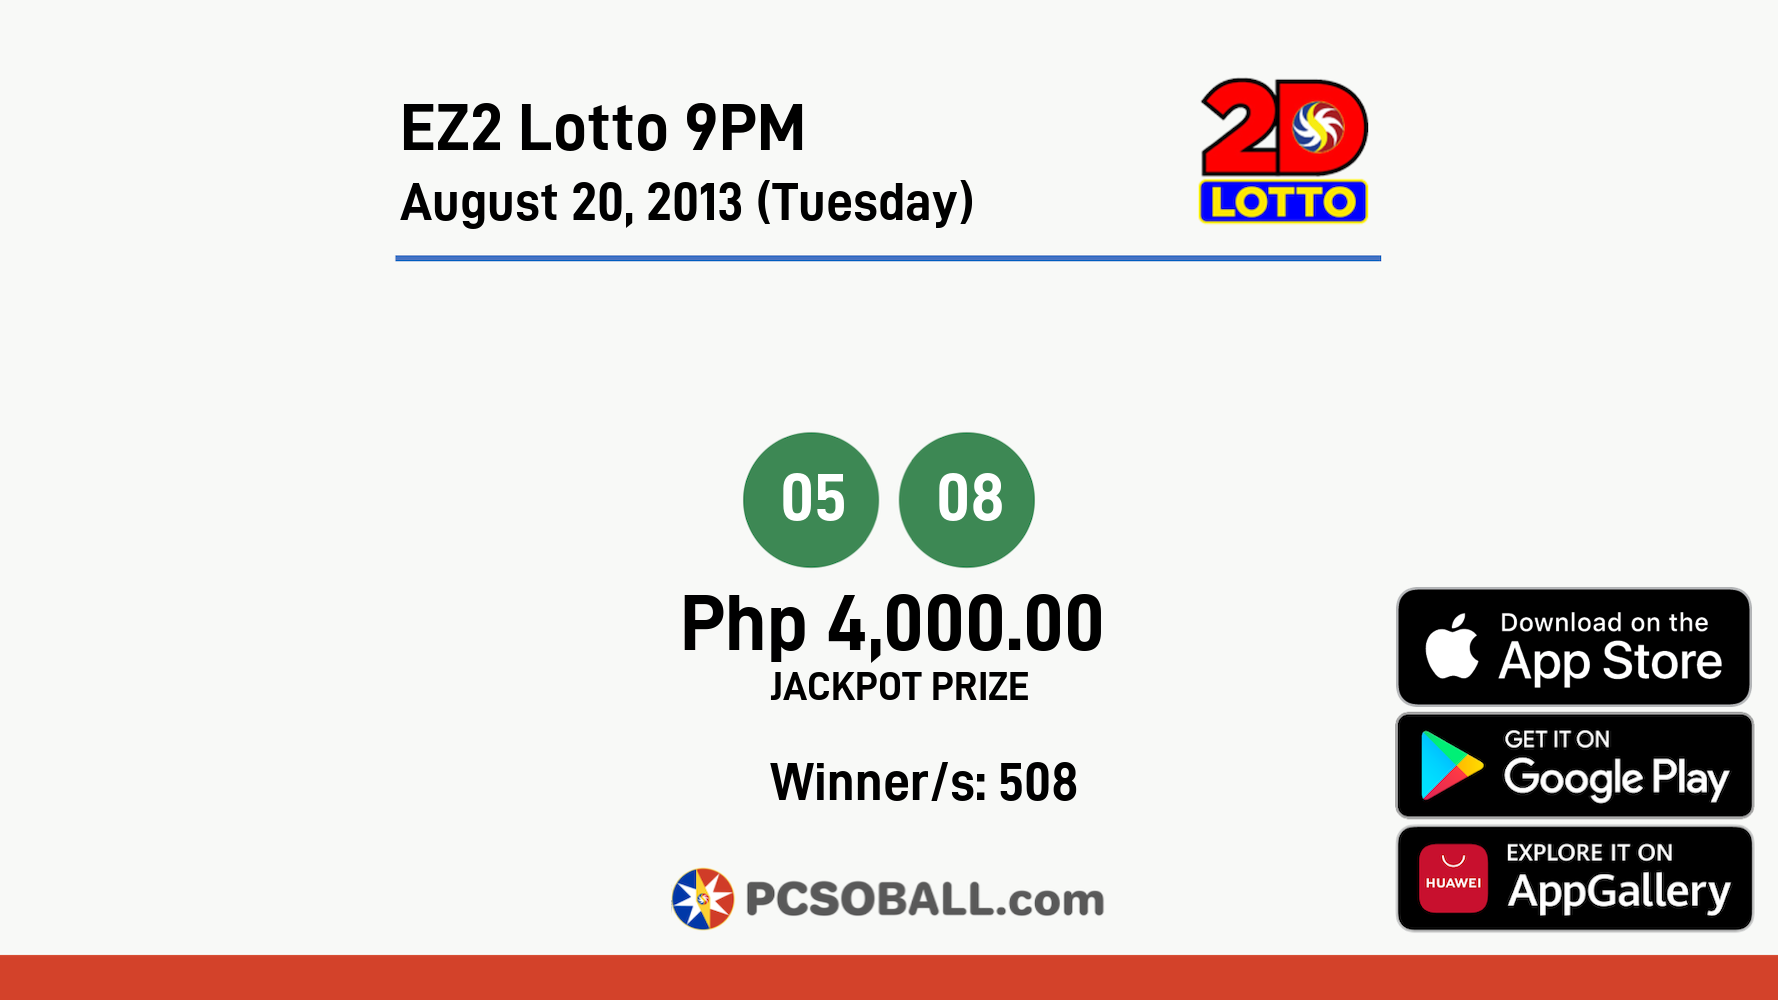 EZ2 Lotto 9PM August 20, 2013 (Tuesday) Result